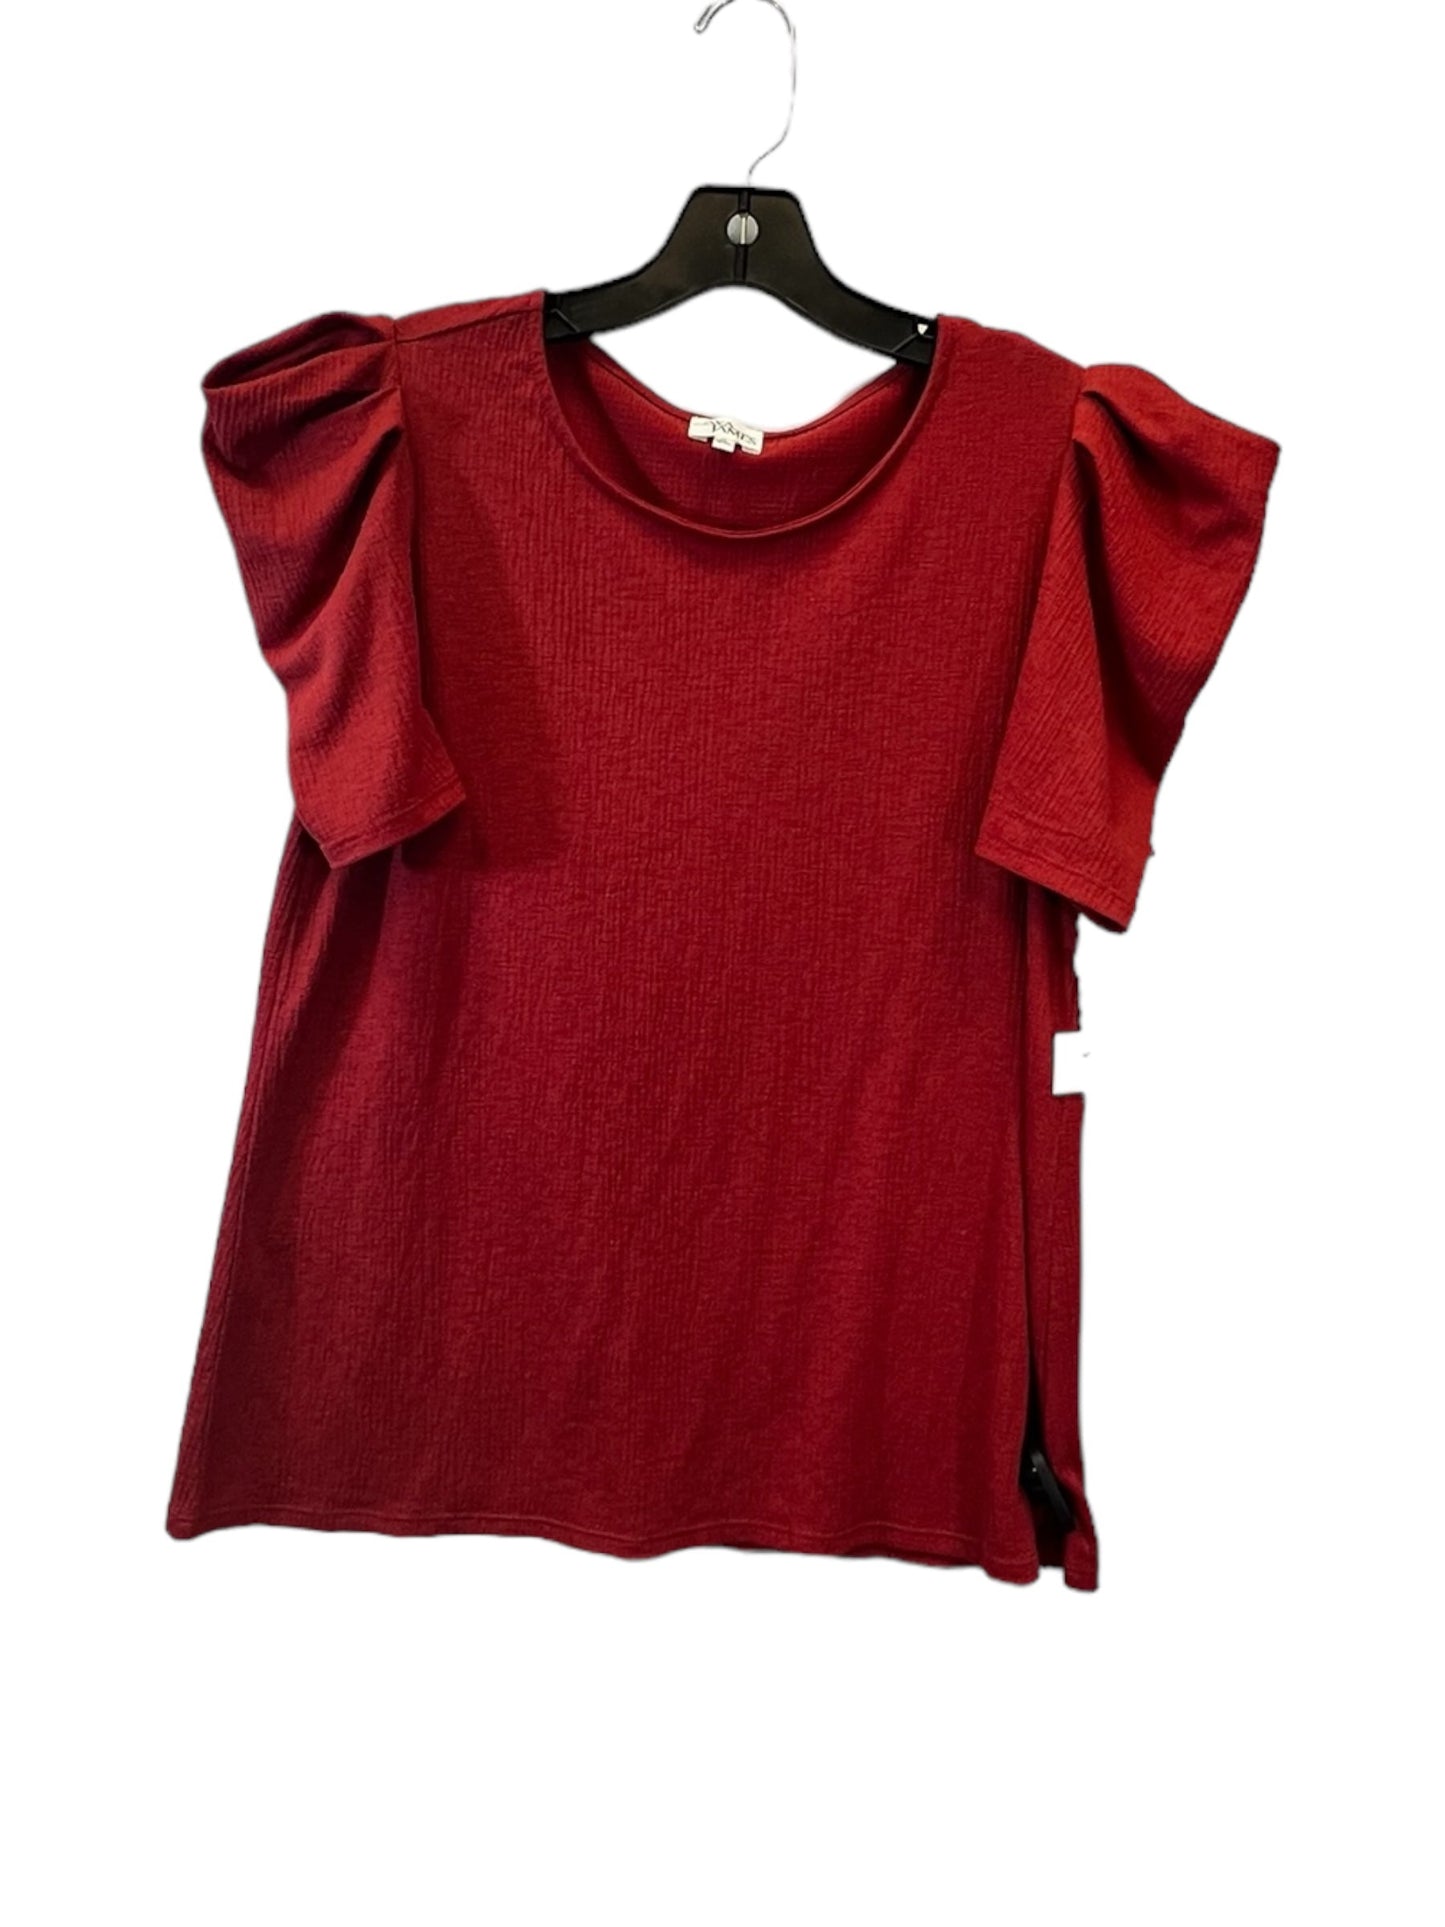 Red Top Short Sleeve Ava James, Size M